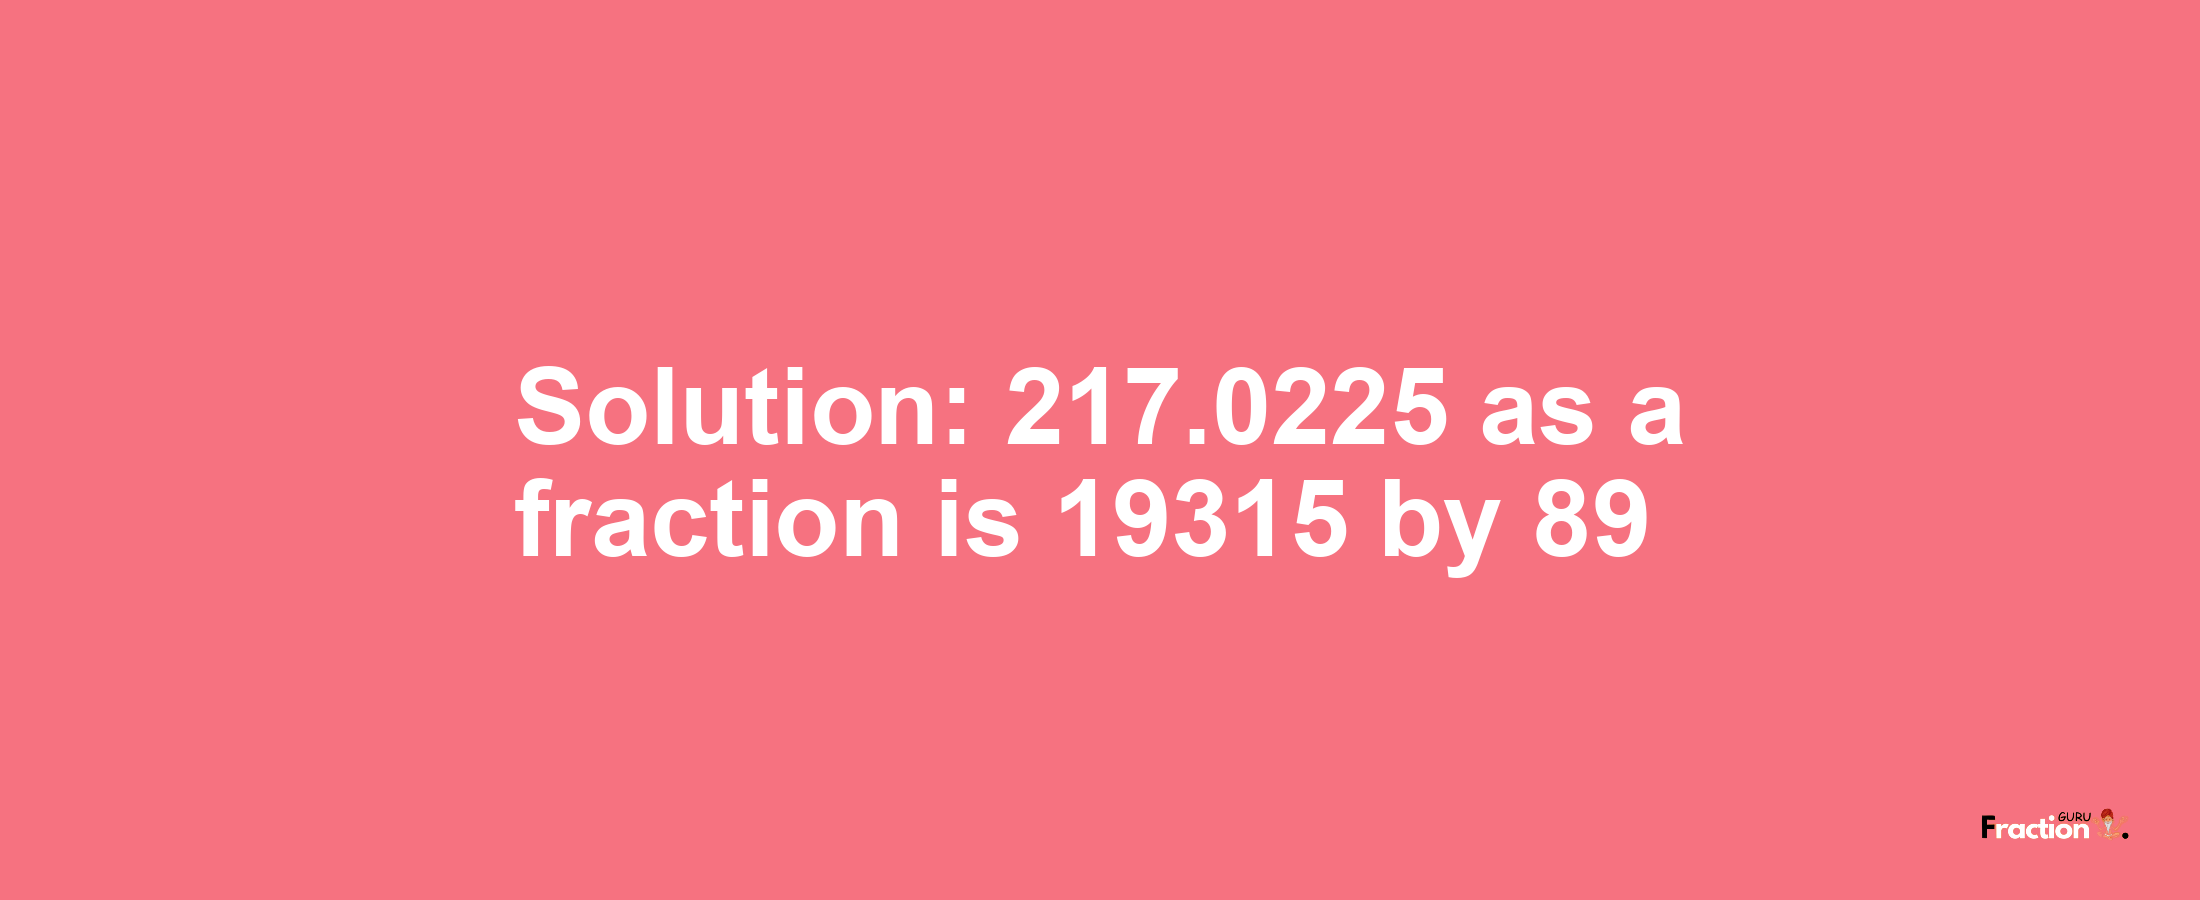 Solution:217.0225 as a fraction is 19315/89